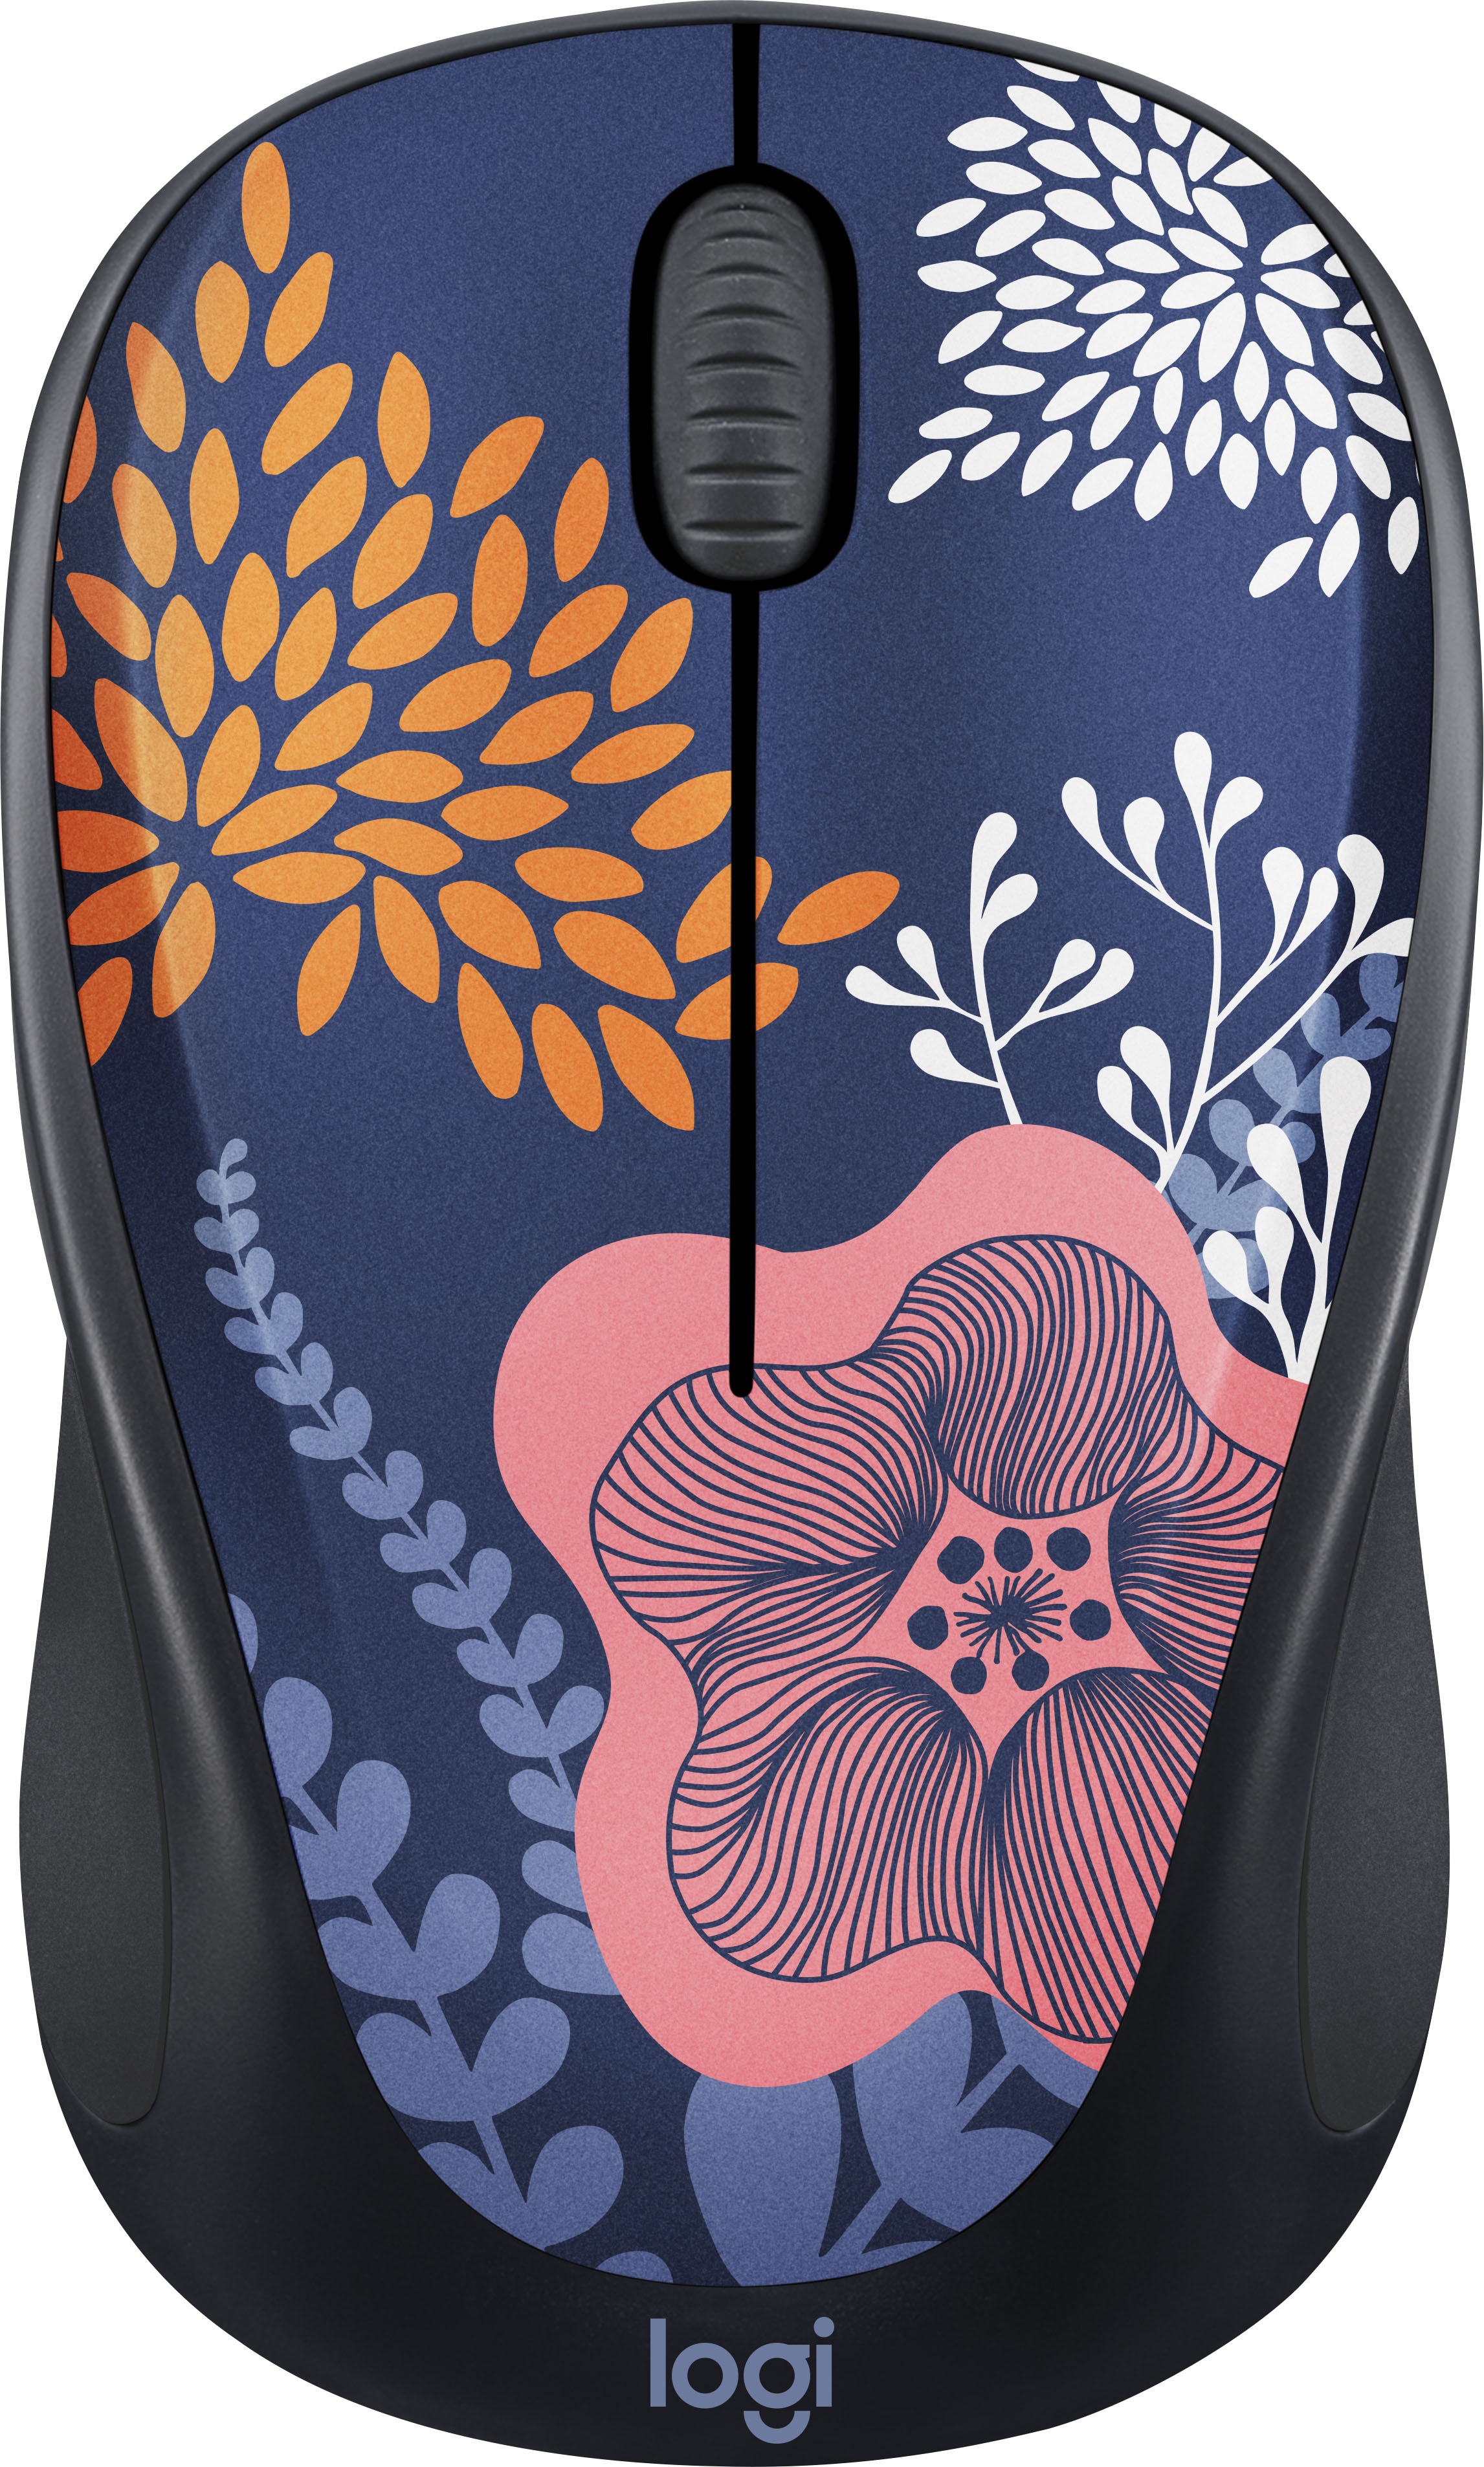 Logitech Design Collection Limited Edition 3-button Ambidextrous Mouse with Colorful Designs Forest Floral 910-006552 - Best Buy